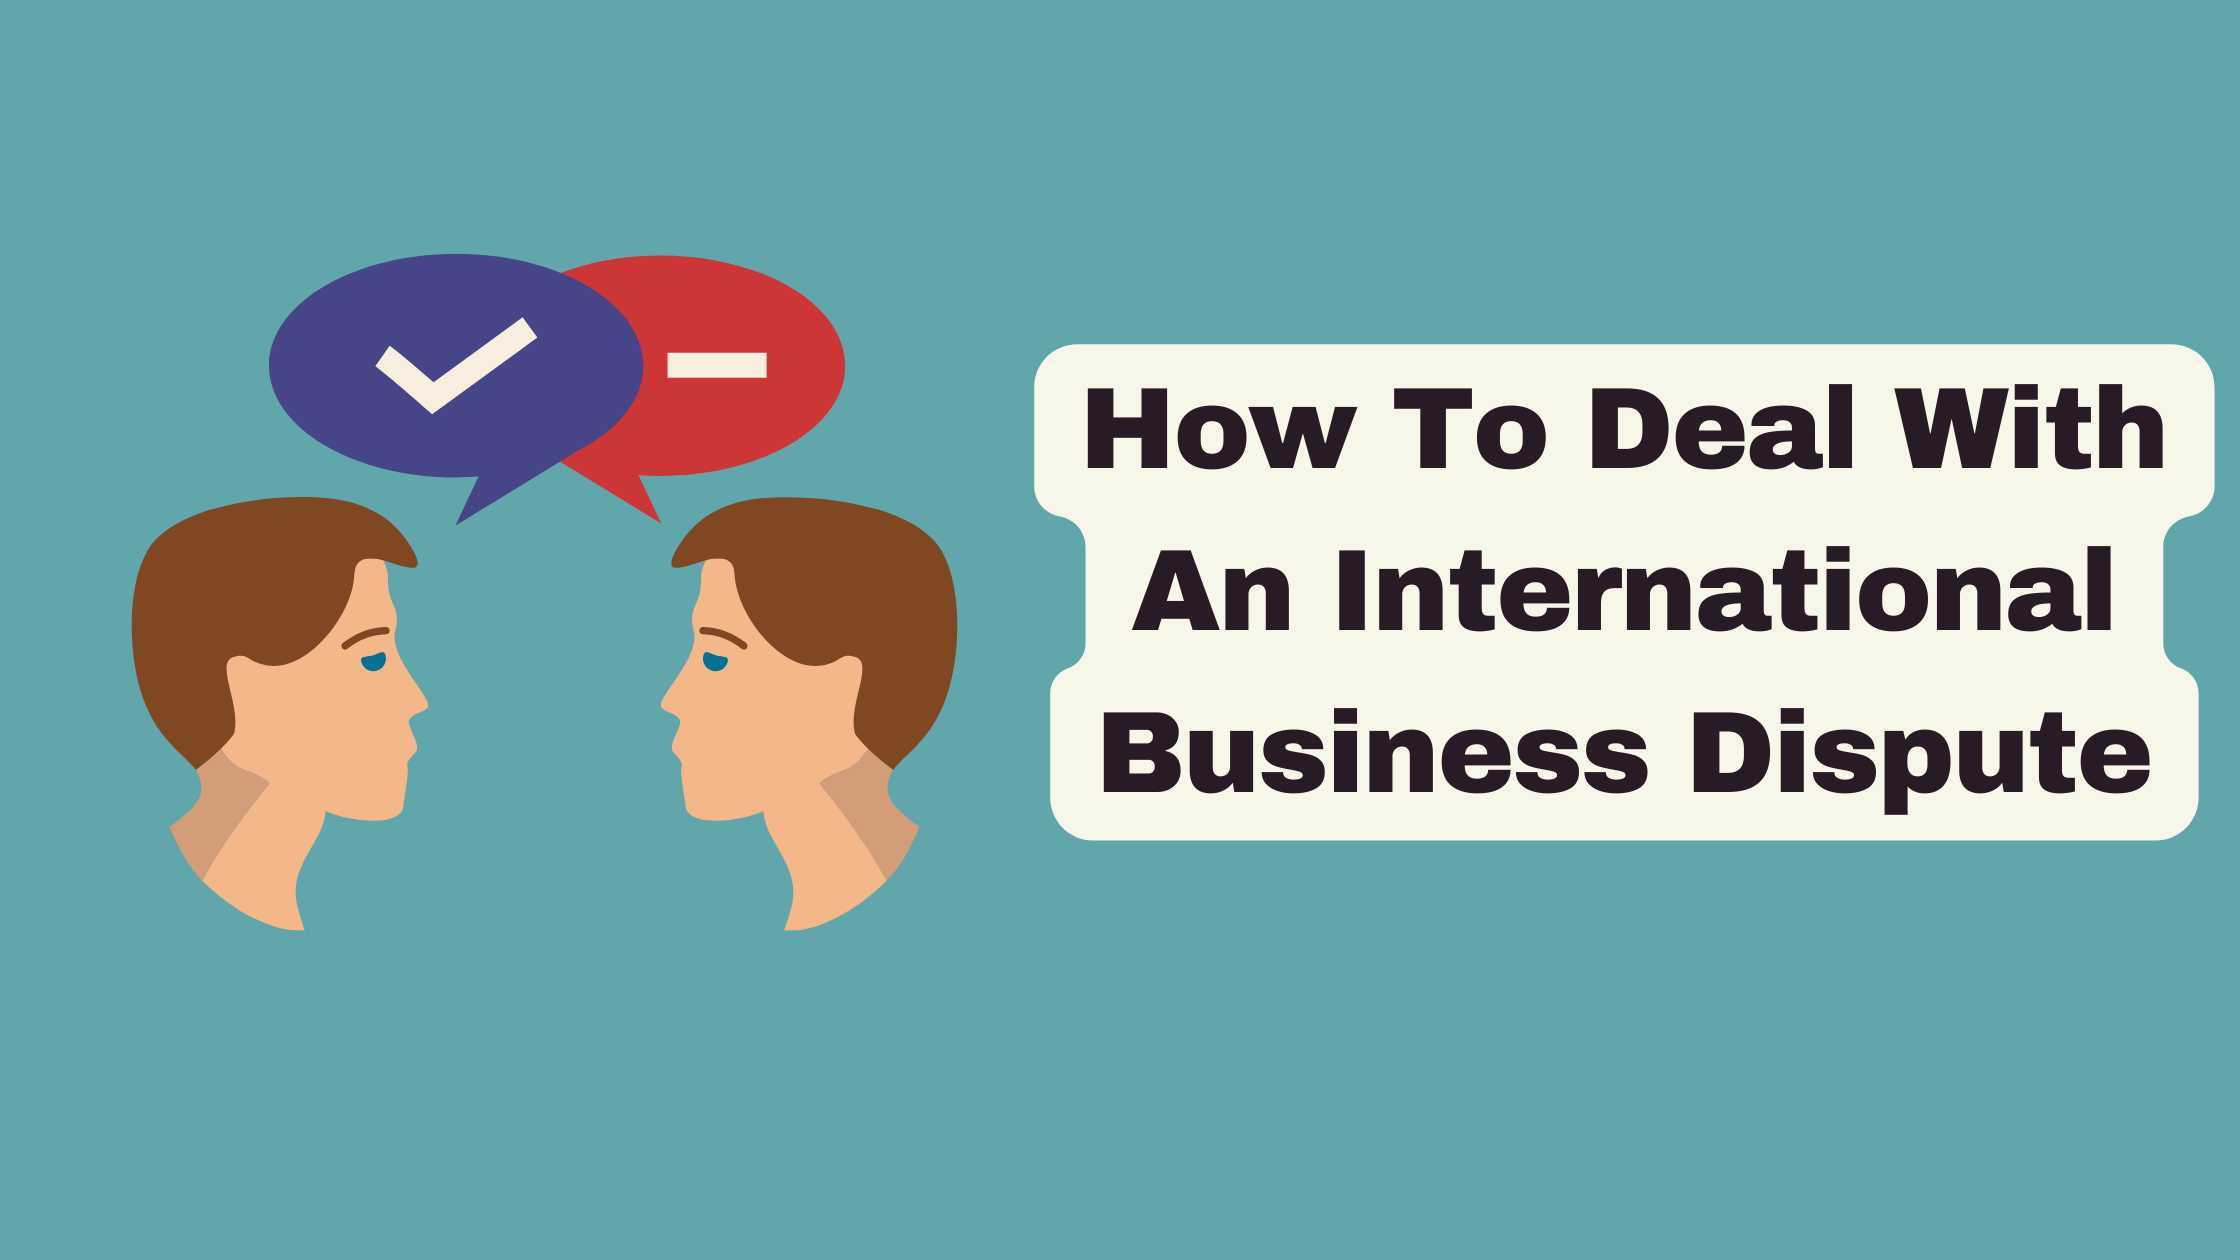 How To Deal With An International Business Dispute